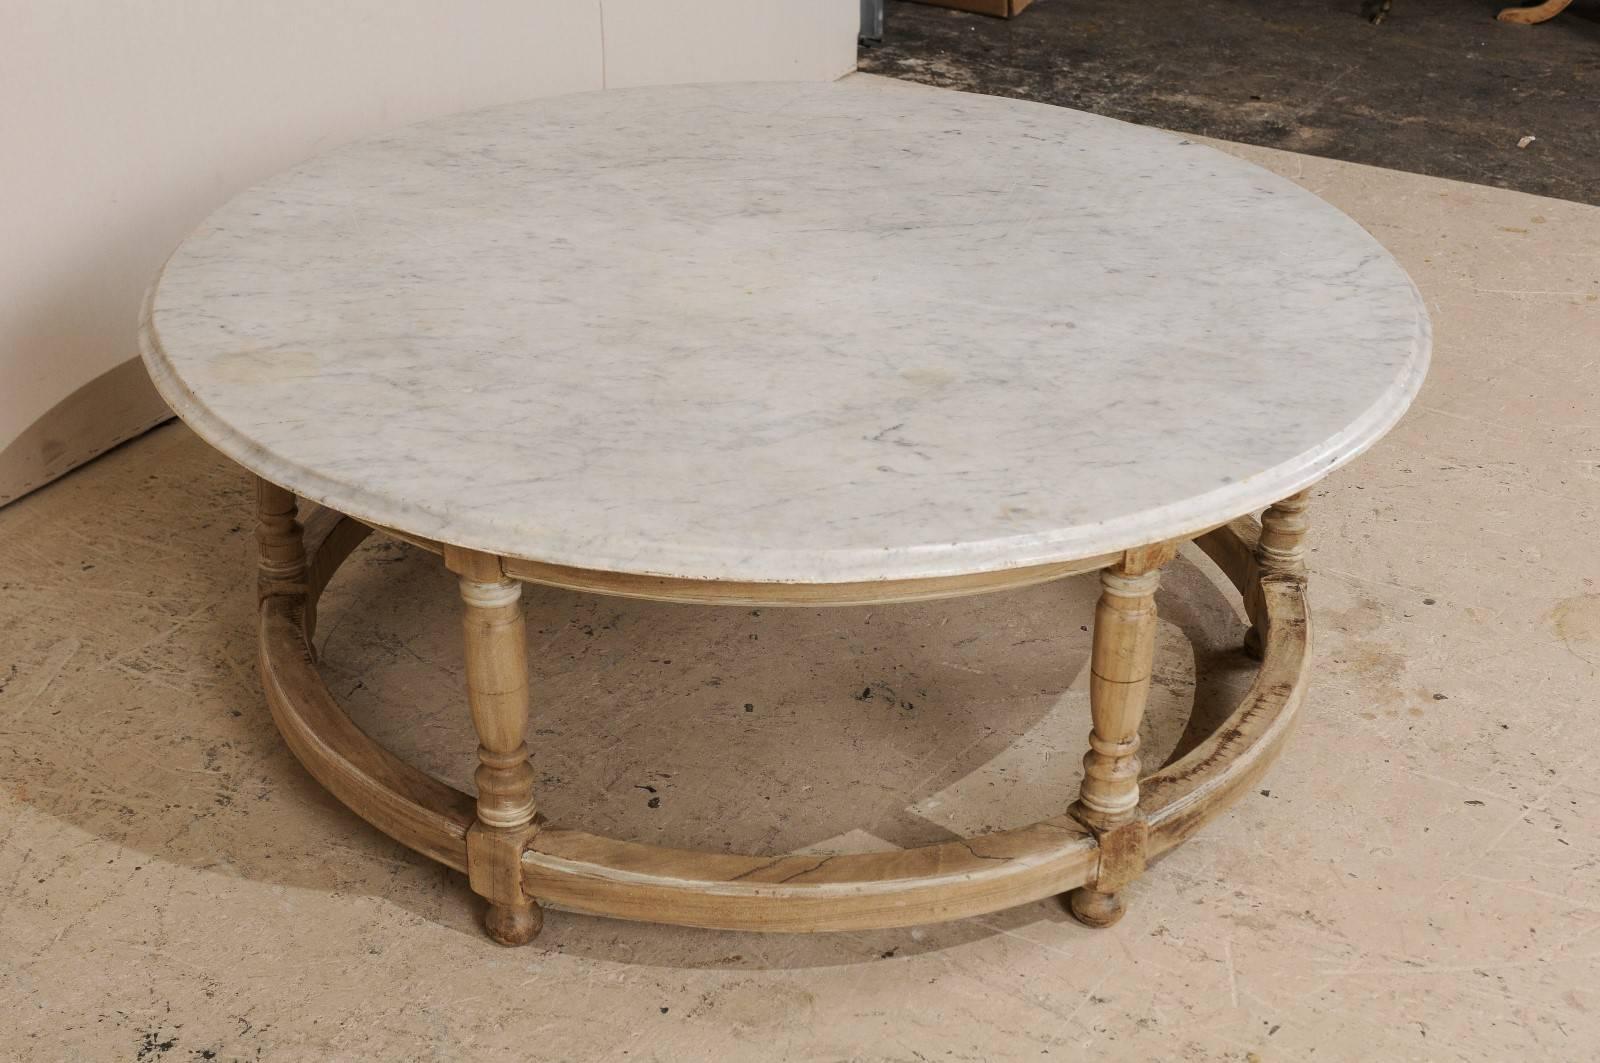 20th Century White Marble Top French Over-Sized Round Wood Coffee Table with Turned Legs